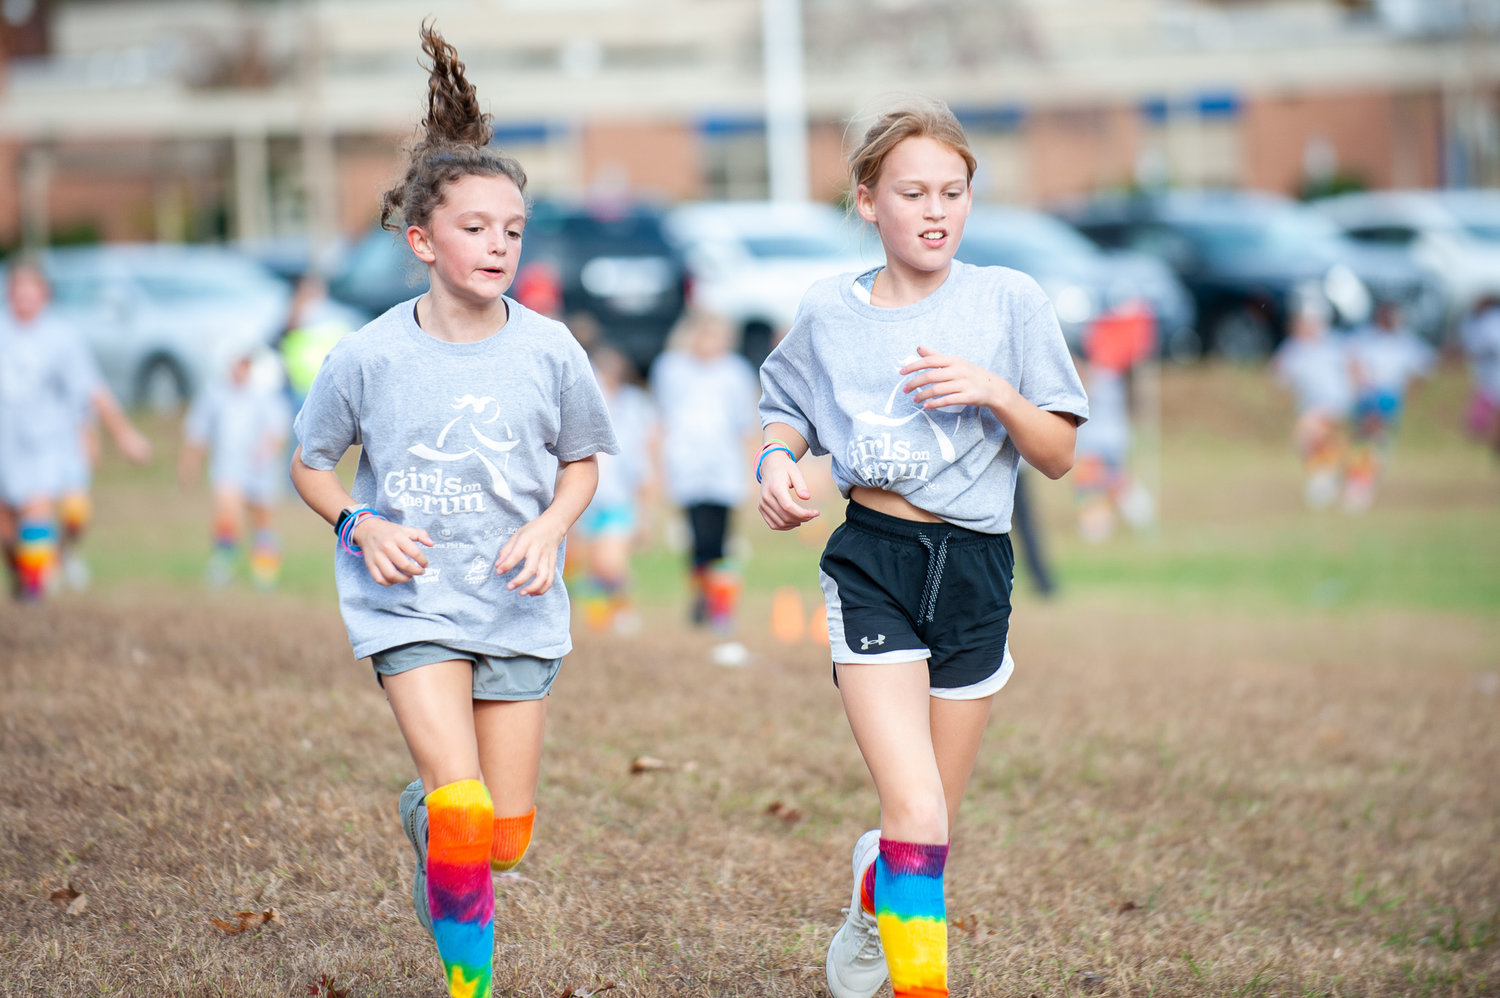 Morgan Hamilton (left) and Claire Crivella kept a fast pace while running at Oak Hill Elementary.